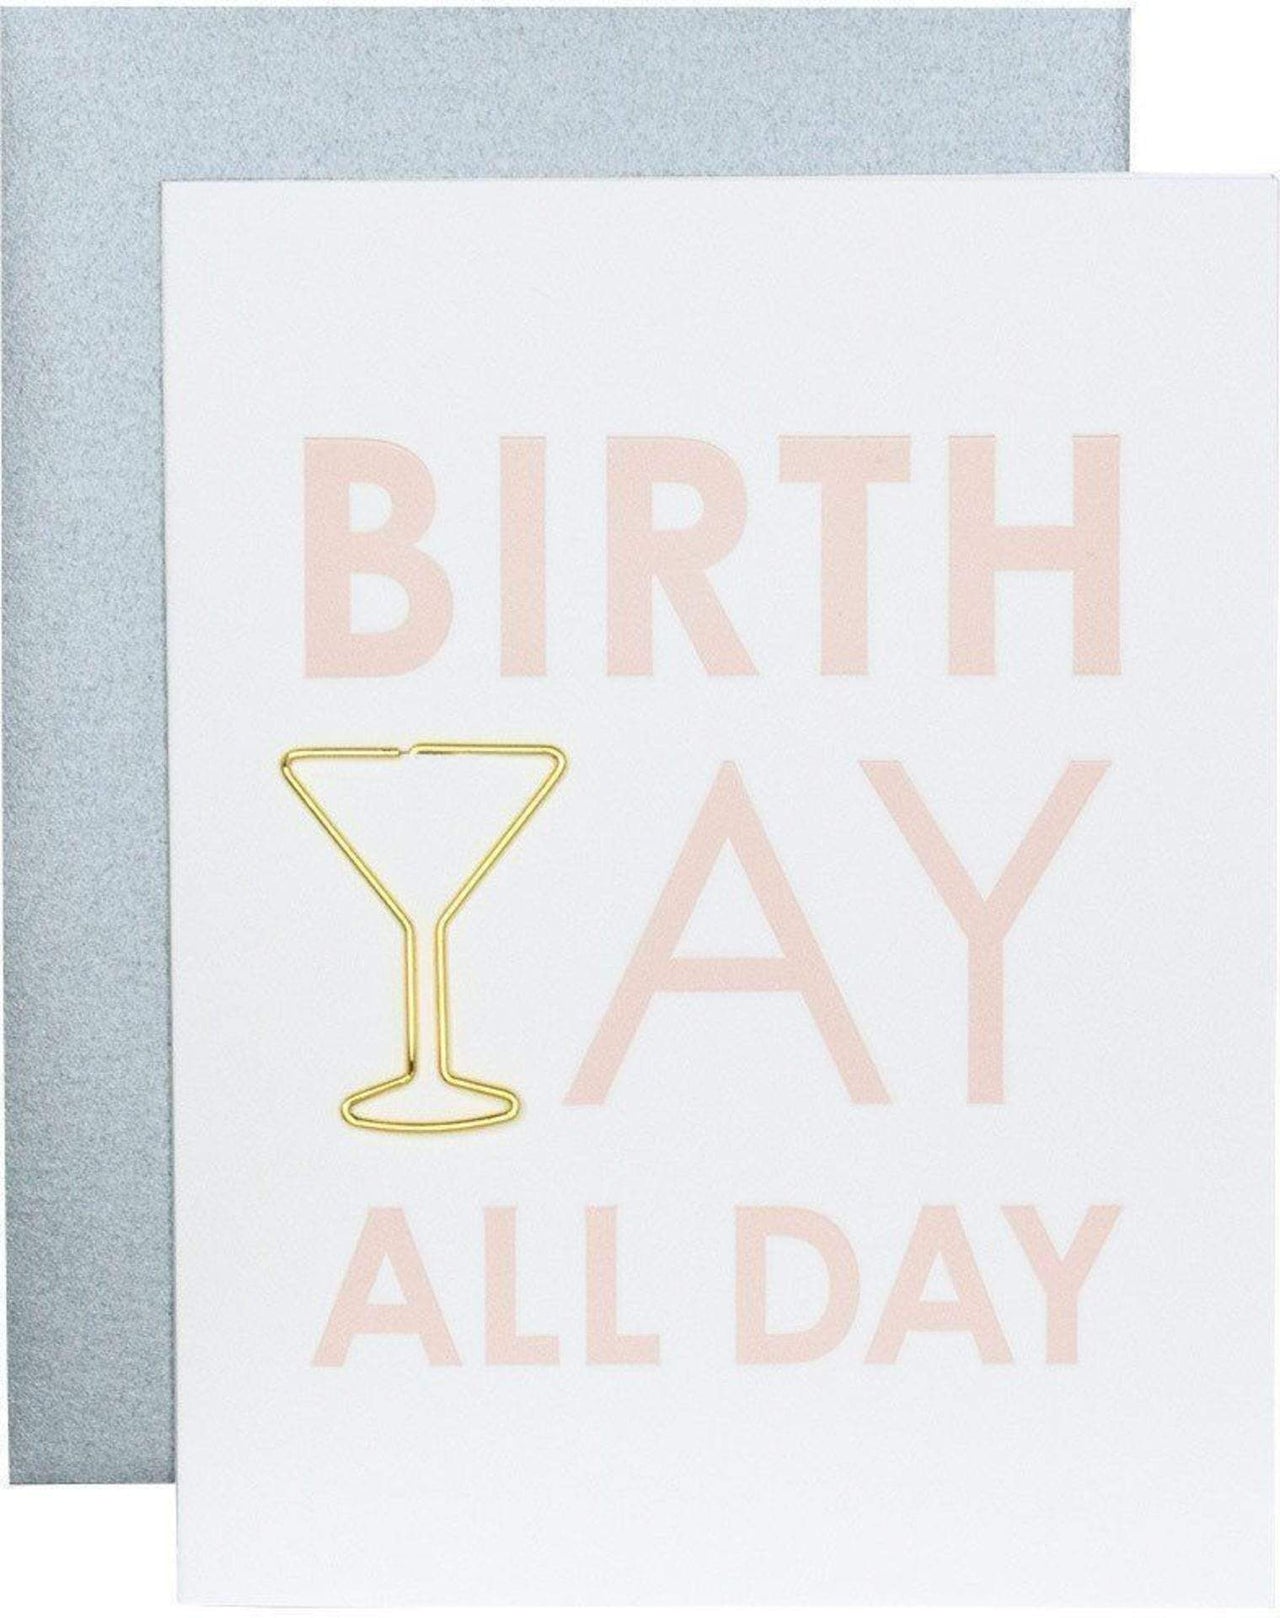 Birth Yay All Day Paper Clip Letterpress Card, Paper Gift by Chez Gagne | LIT Boutique